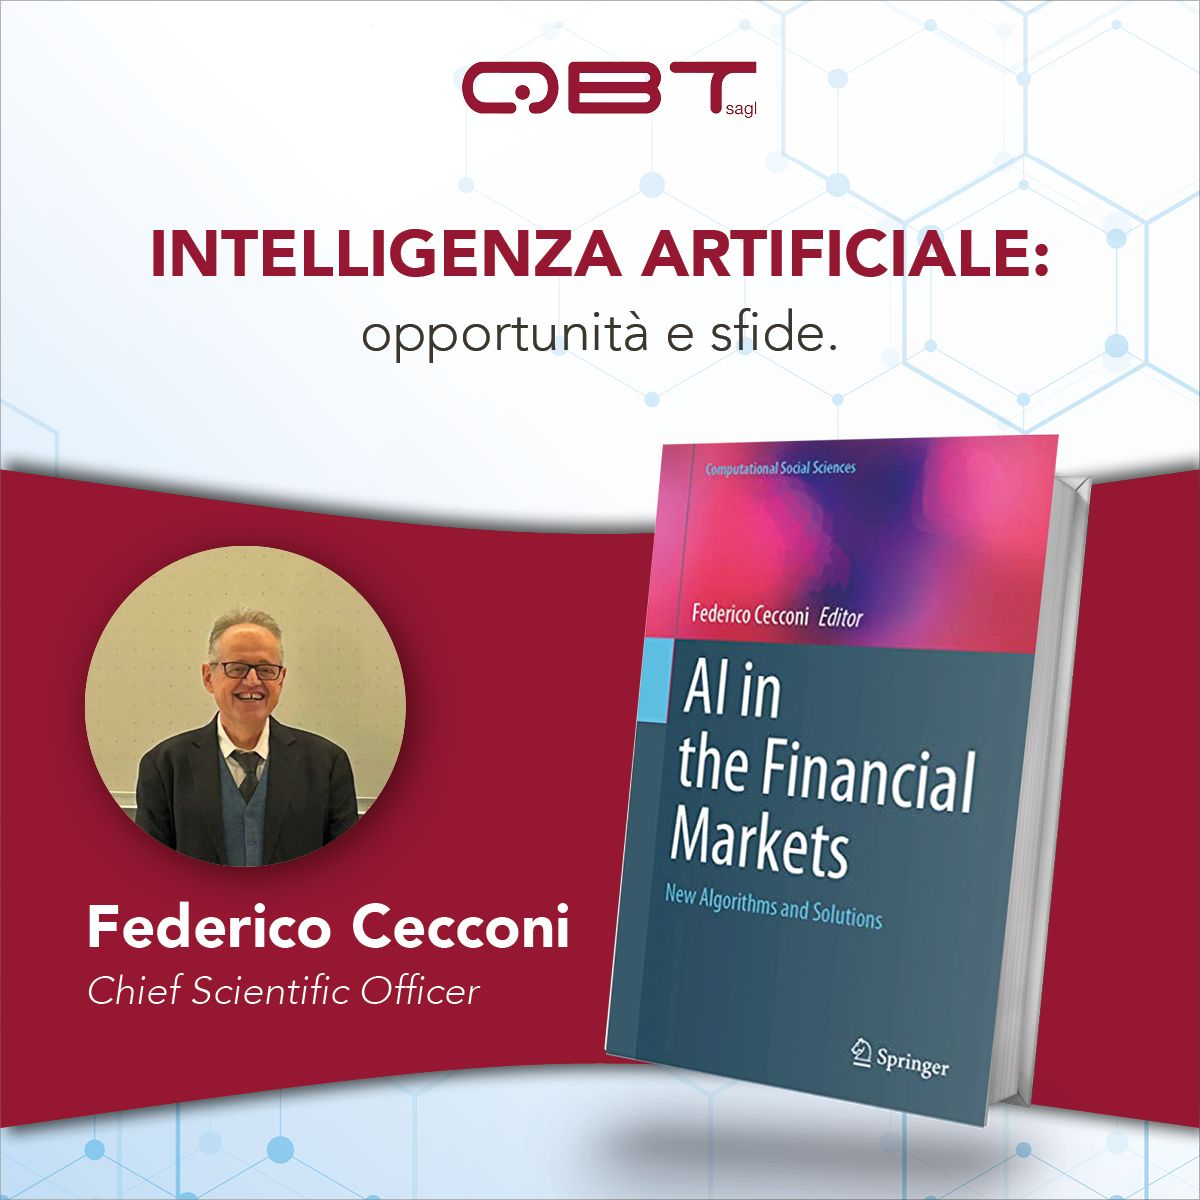 New Springer book: "AI in the Financial Markets"